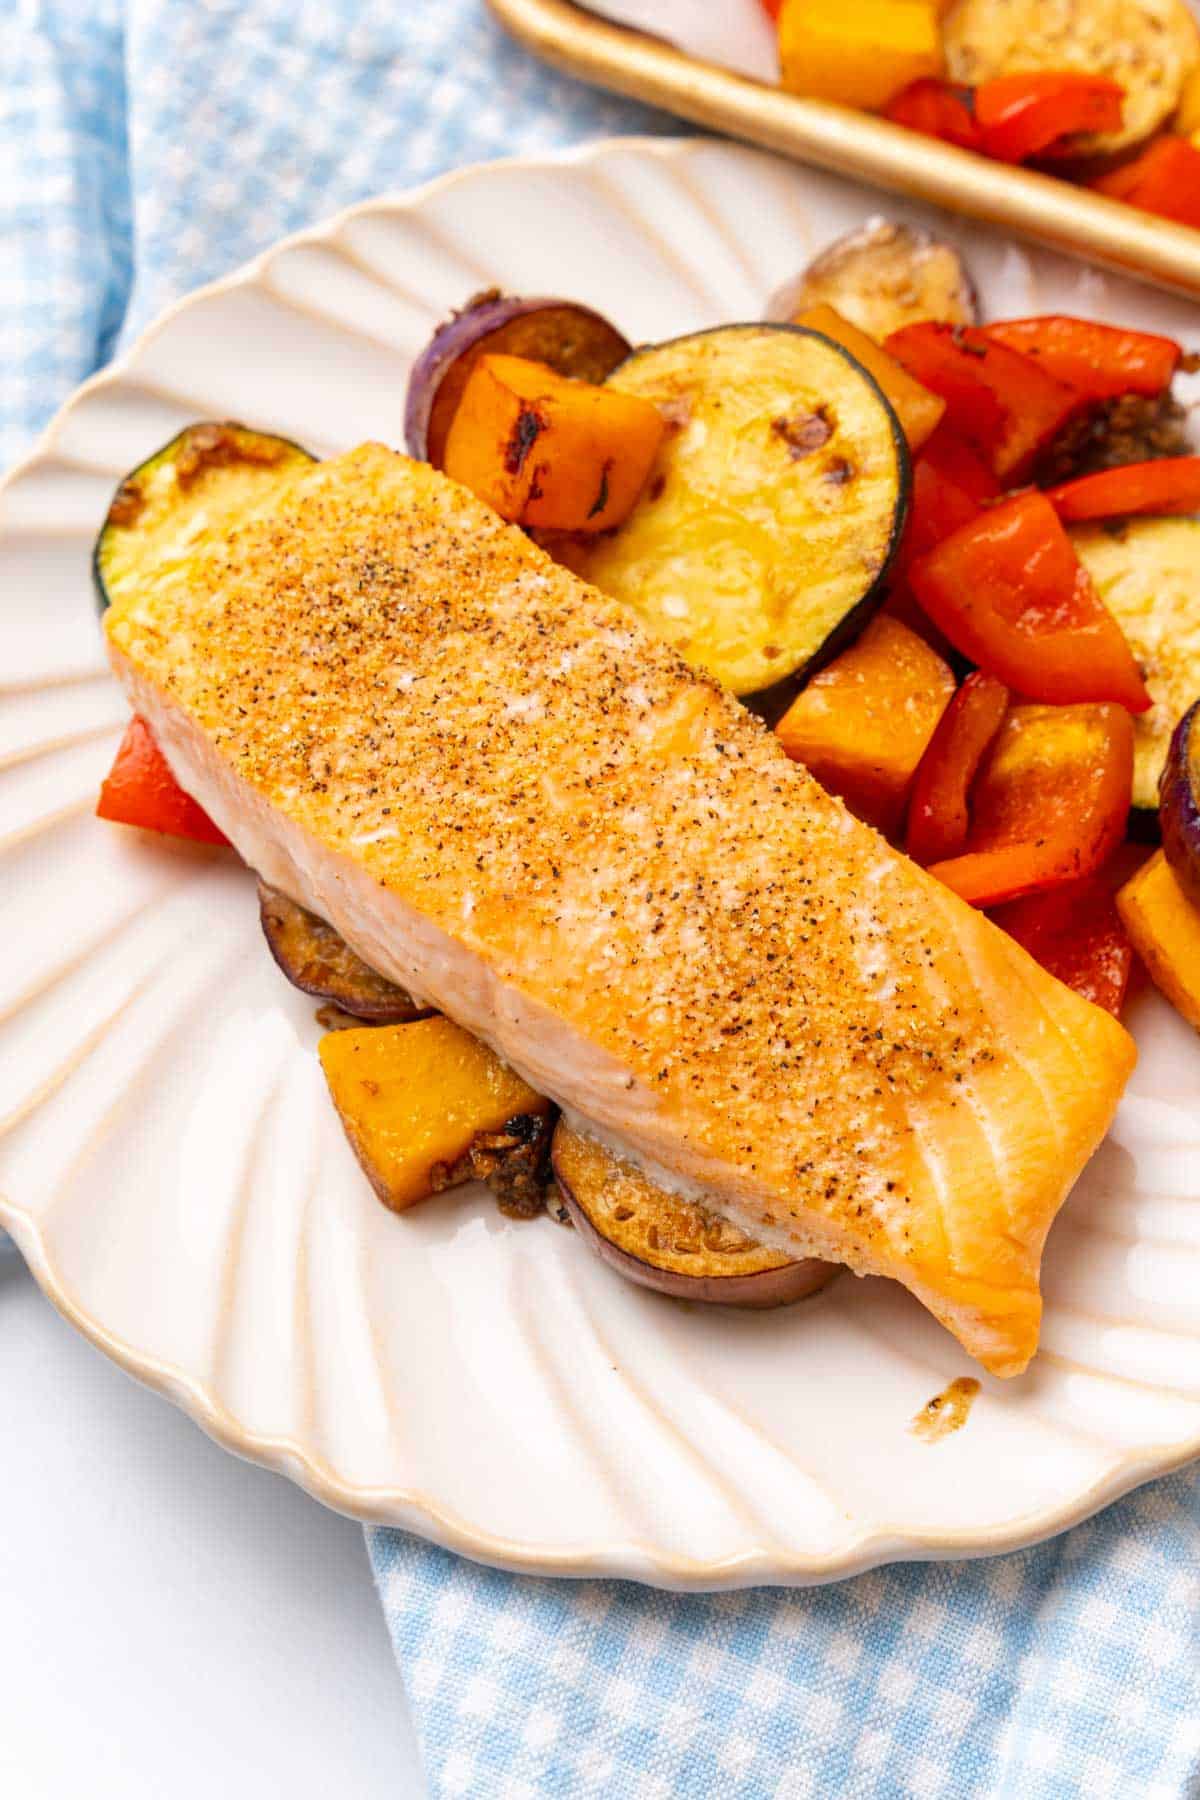 Baked salmon with roasted vegetables on a white plate on a blue checkered cloth napkin